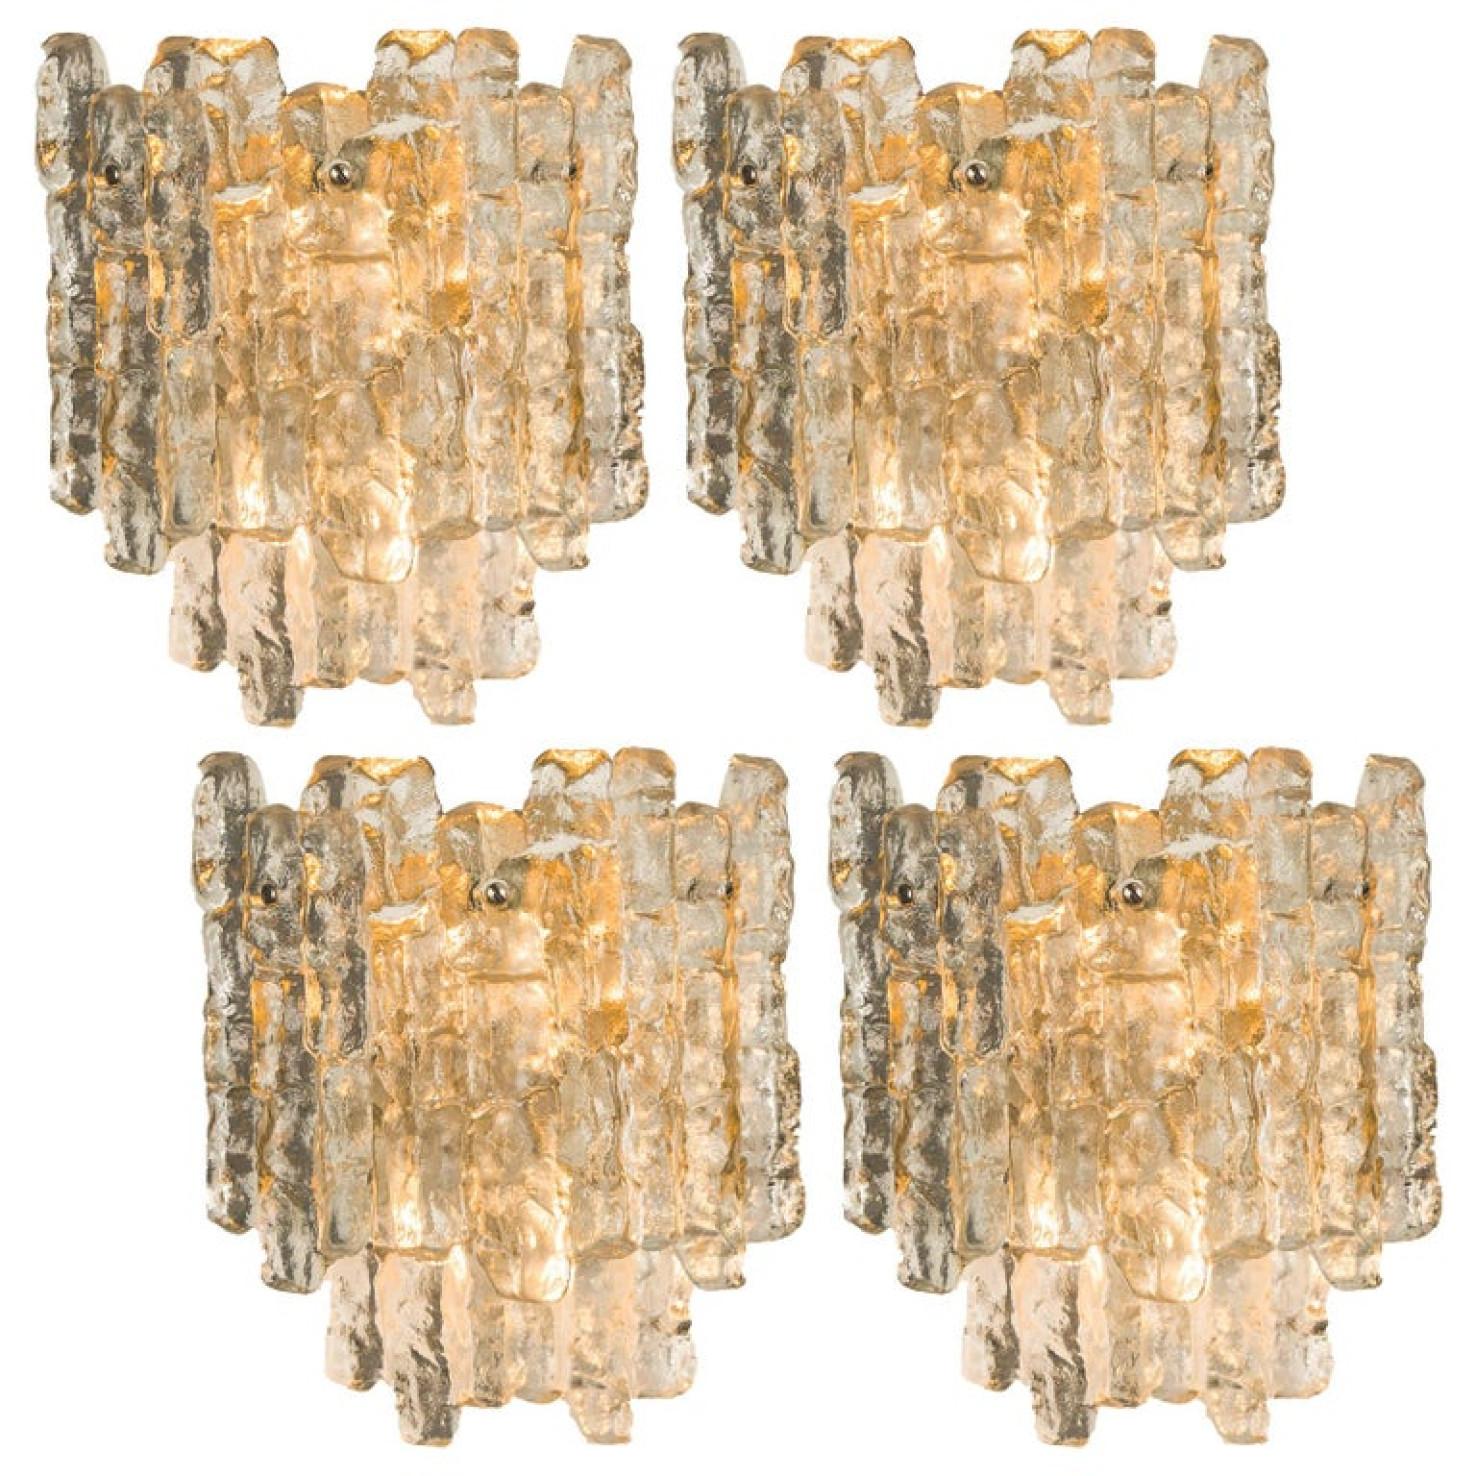 1 of the 2 Exceptional Huge Glass Flush Mount /Chandeliers by J.T. Kalmar, 1960s For Sale 4